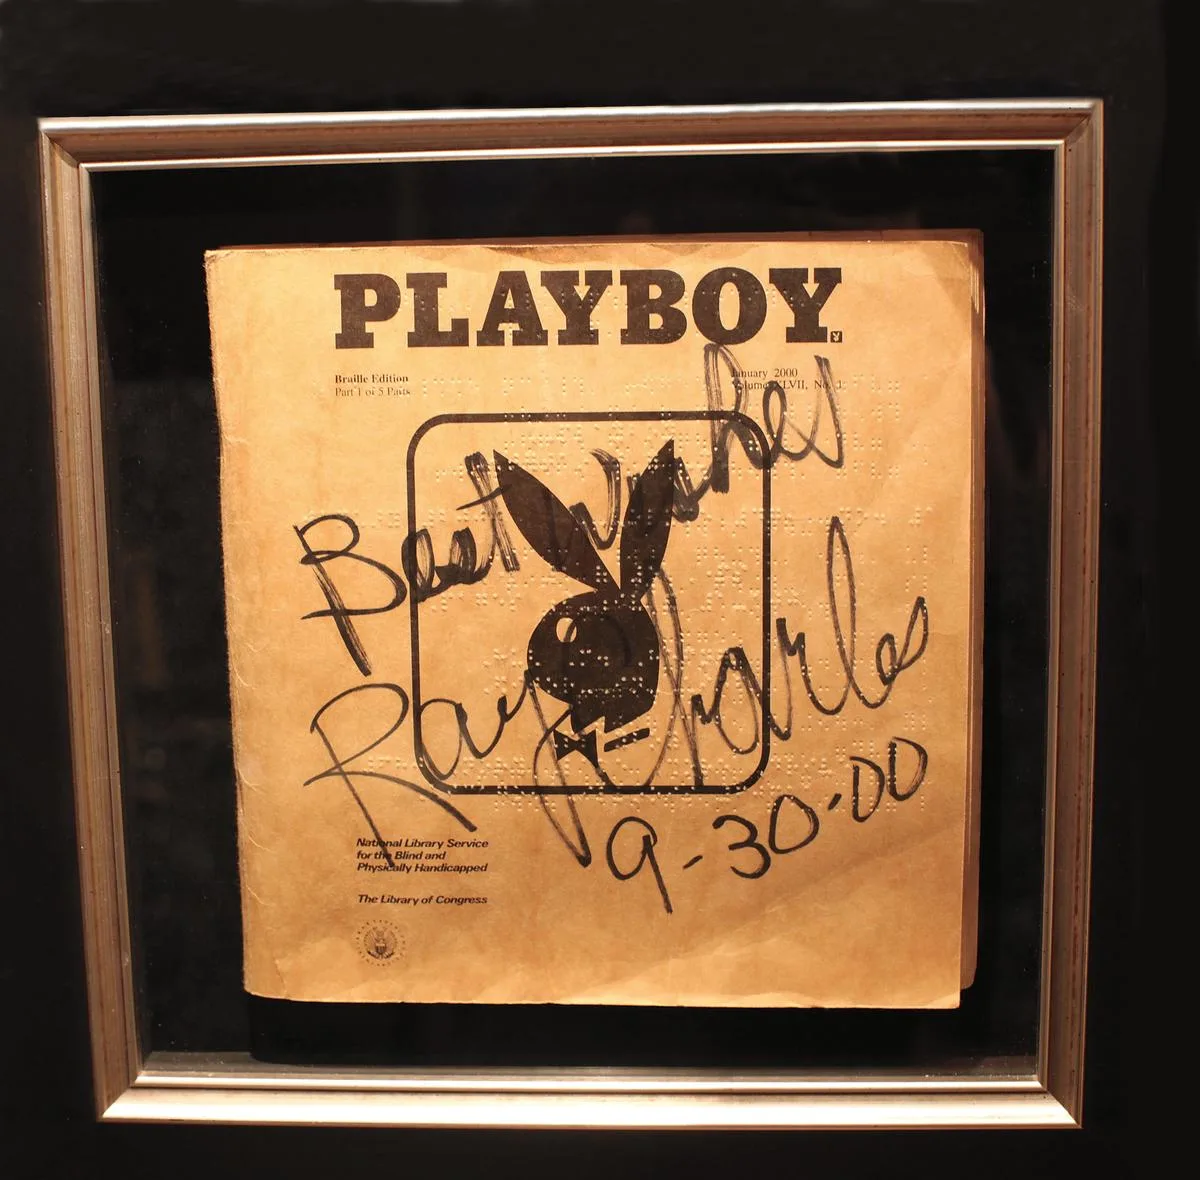 1970 - The first Braille edition of Playboy is provided by the Library of Congress to 45 regional libraries across the country. (Image: Playboy Braille Edition signed by Ray Charles, by Lisa Hancock/FilmMagic.)